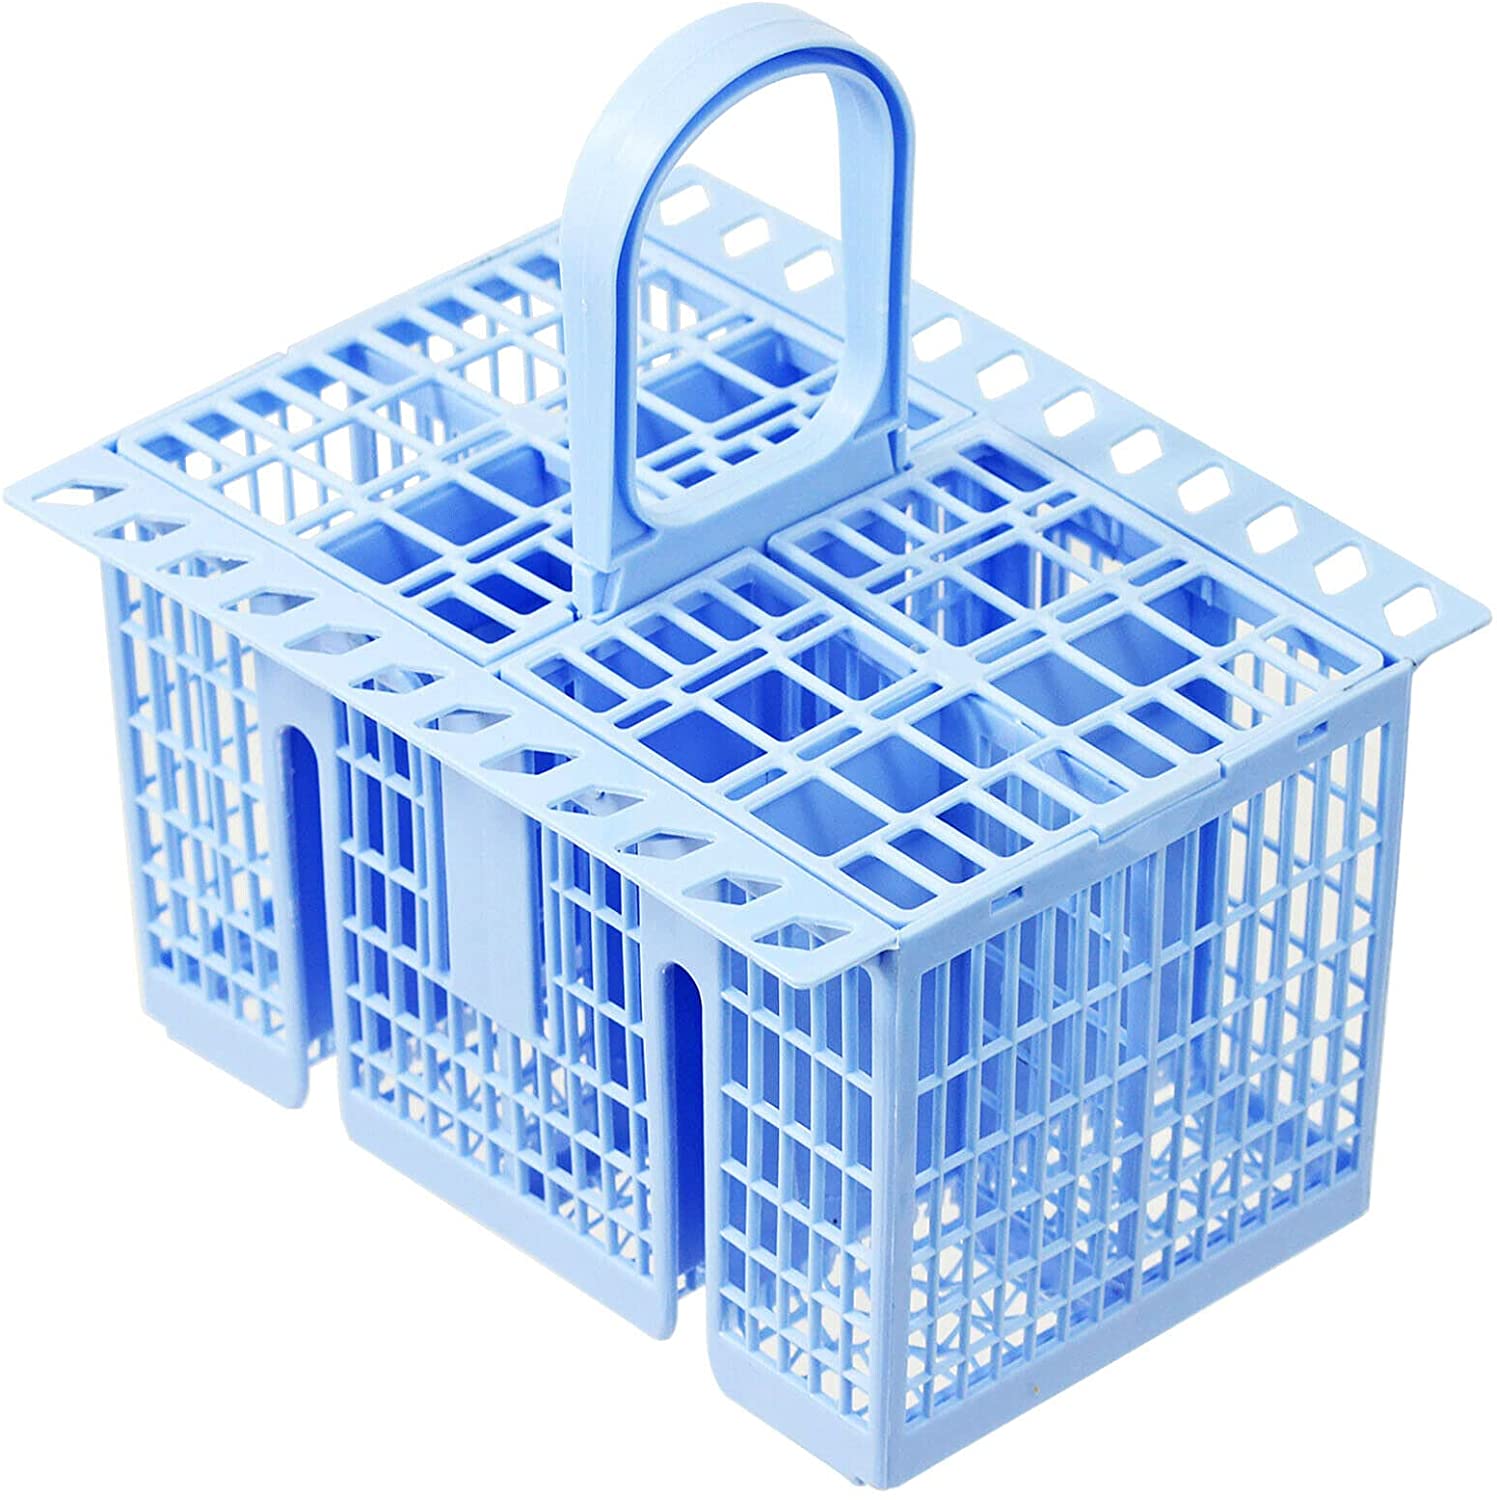 SPARES2GO Cutlery Basket compatible with Stoves Dishwasher (Blue, 220 x 208 x 160mm)